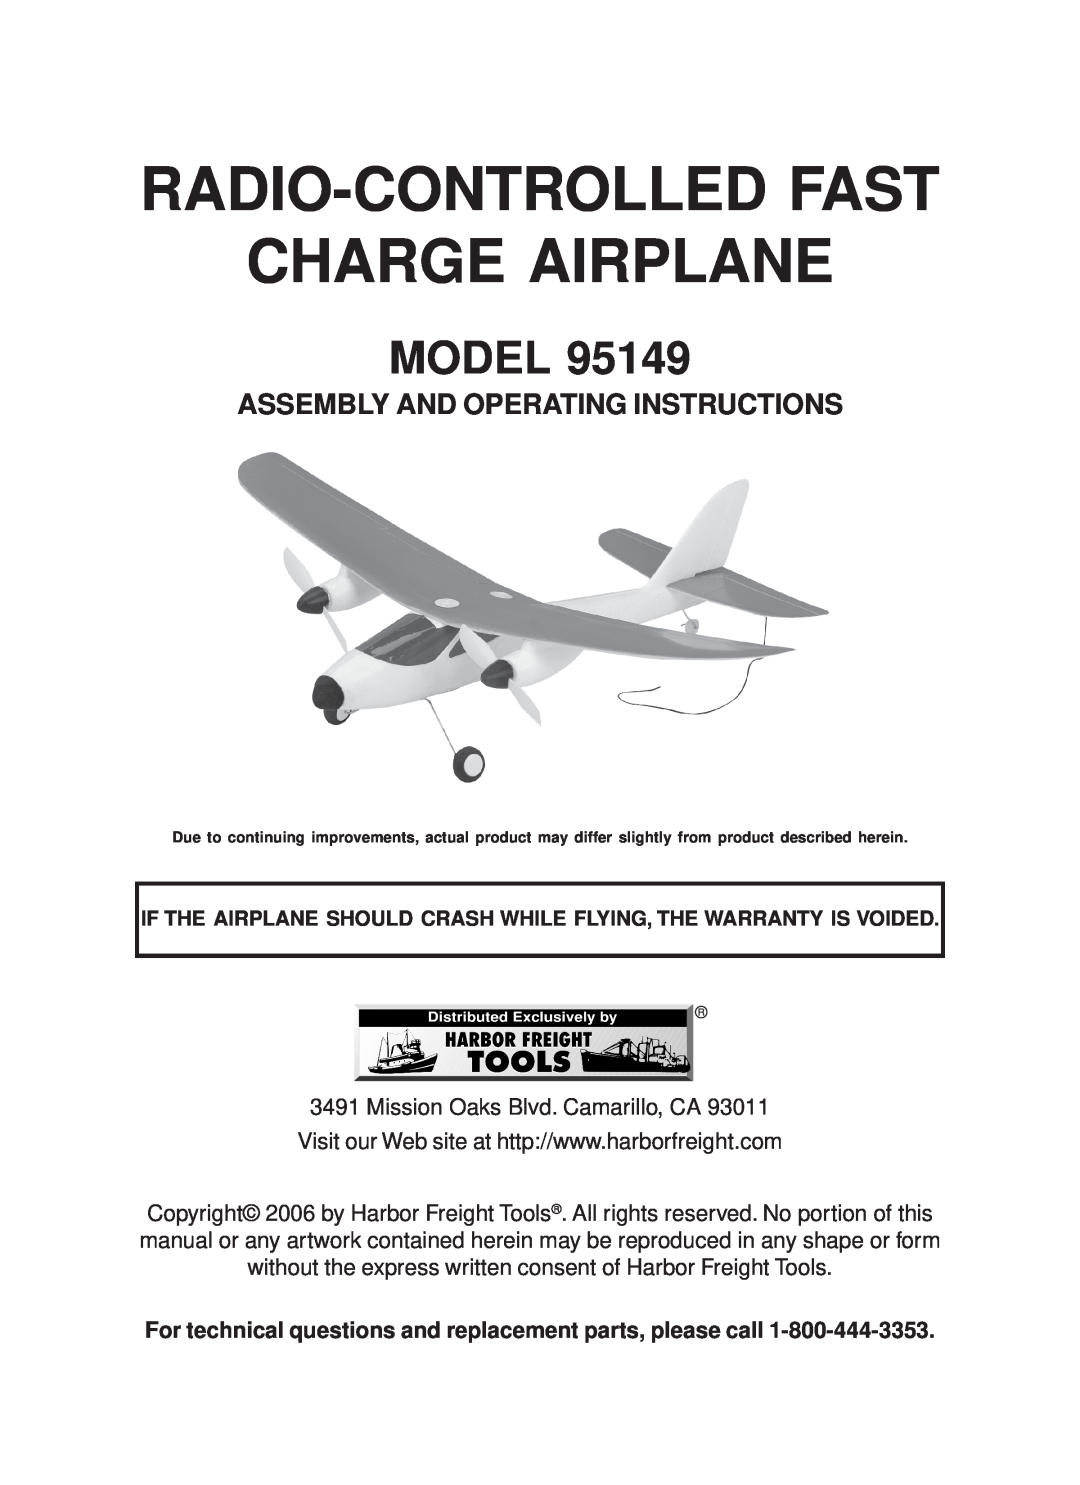 Harbor Freight Tools 95149 warranty Radio-Controlledfast Charge Airplane, Model, Assembly And Operating Instructions 